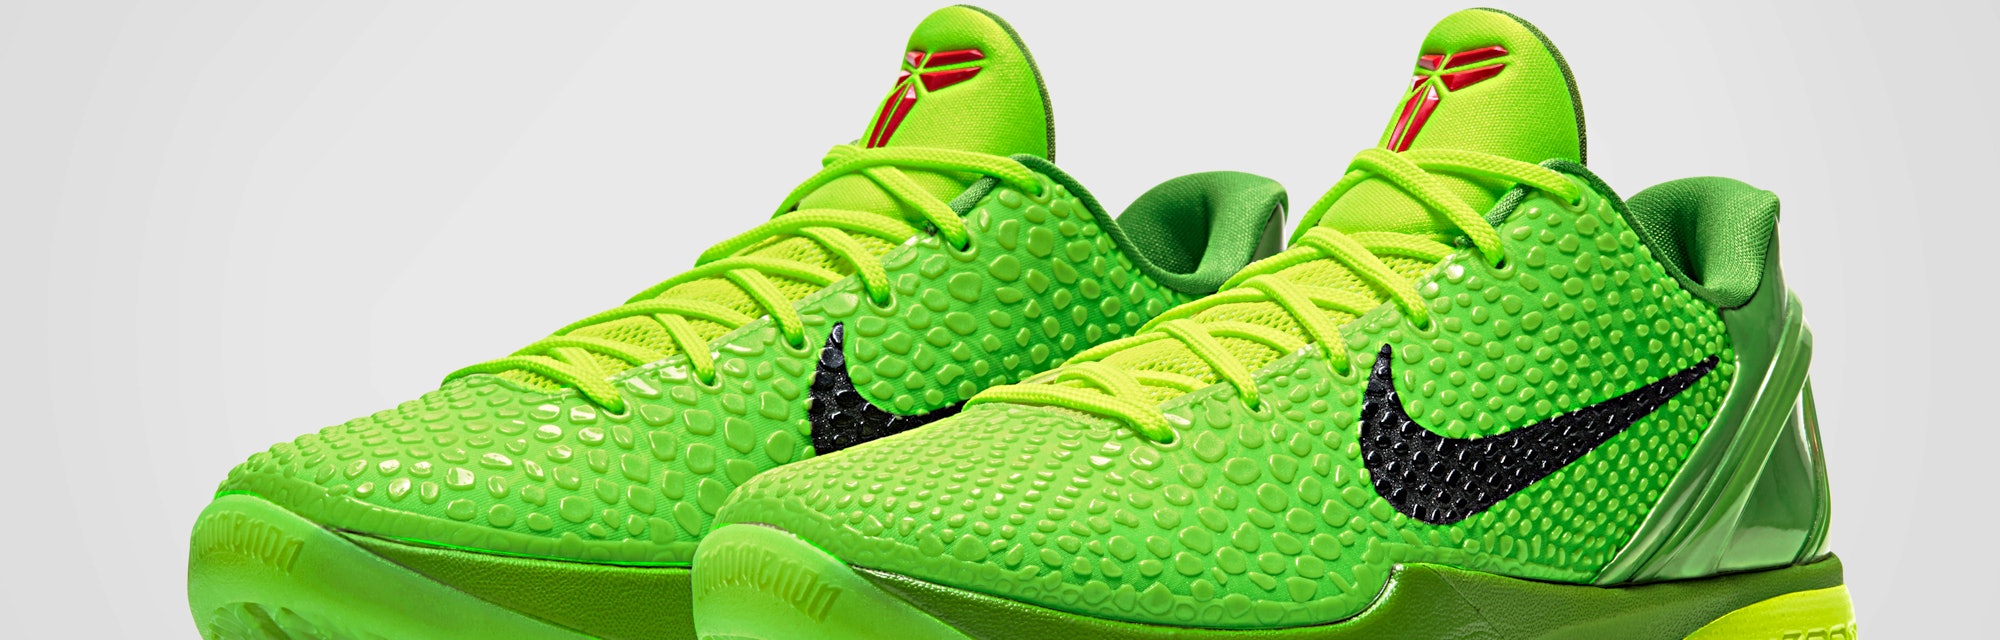 Nike's kobe grinch iconic Kobe 6 'Grinch' sneaker is coming back better than ever